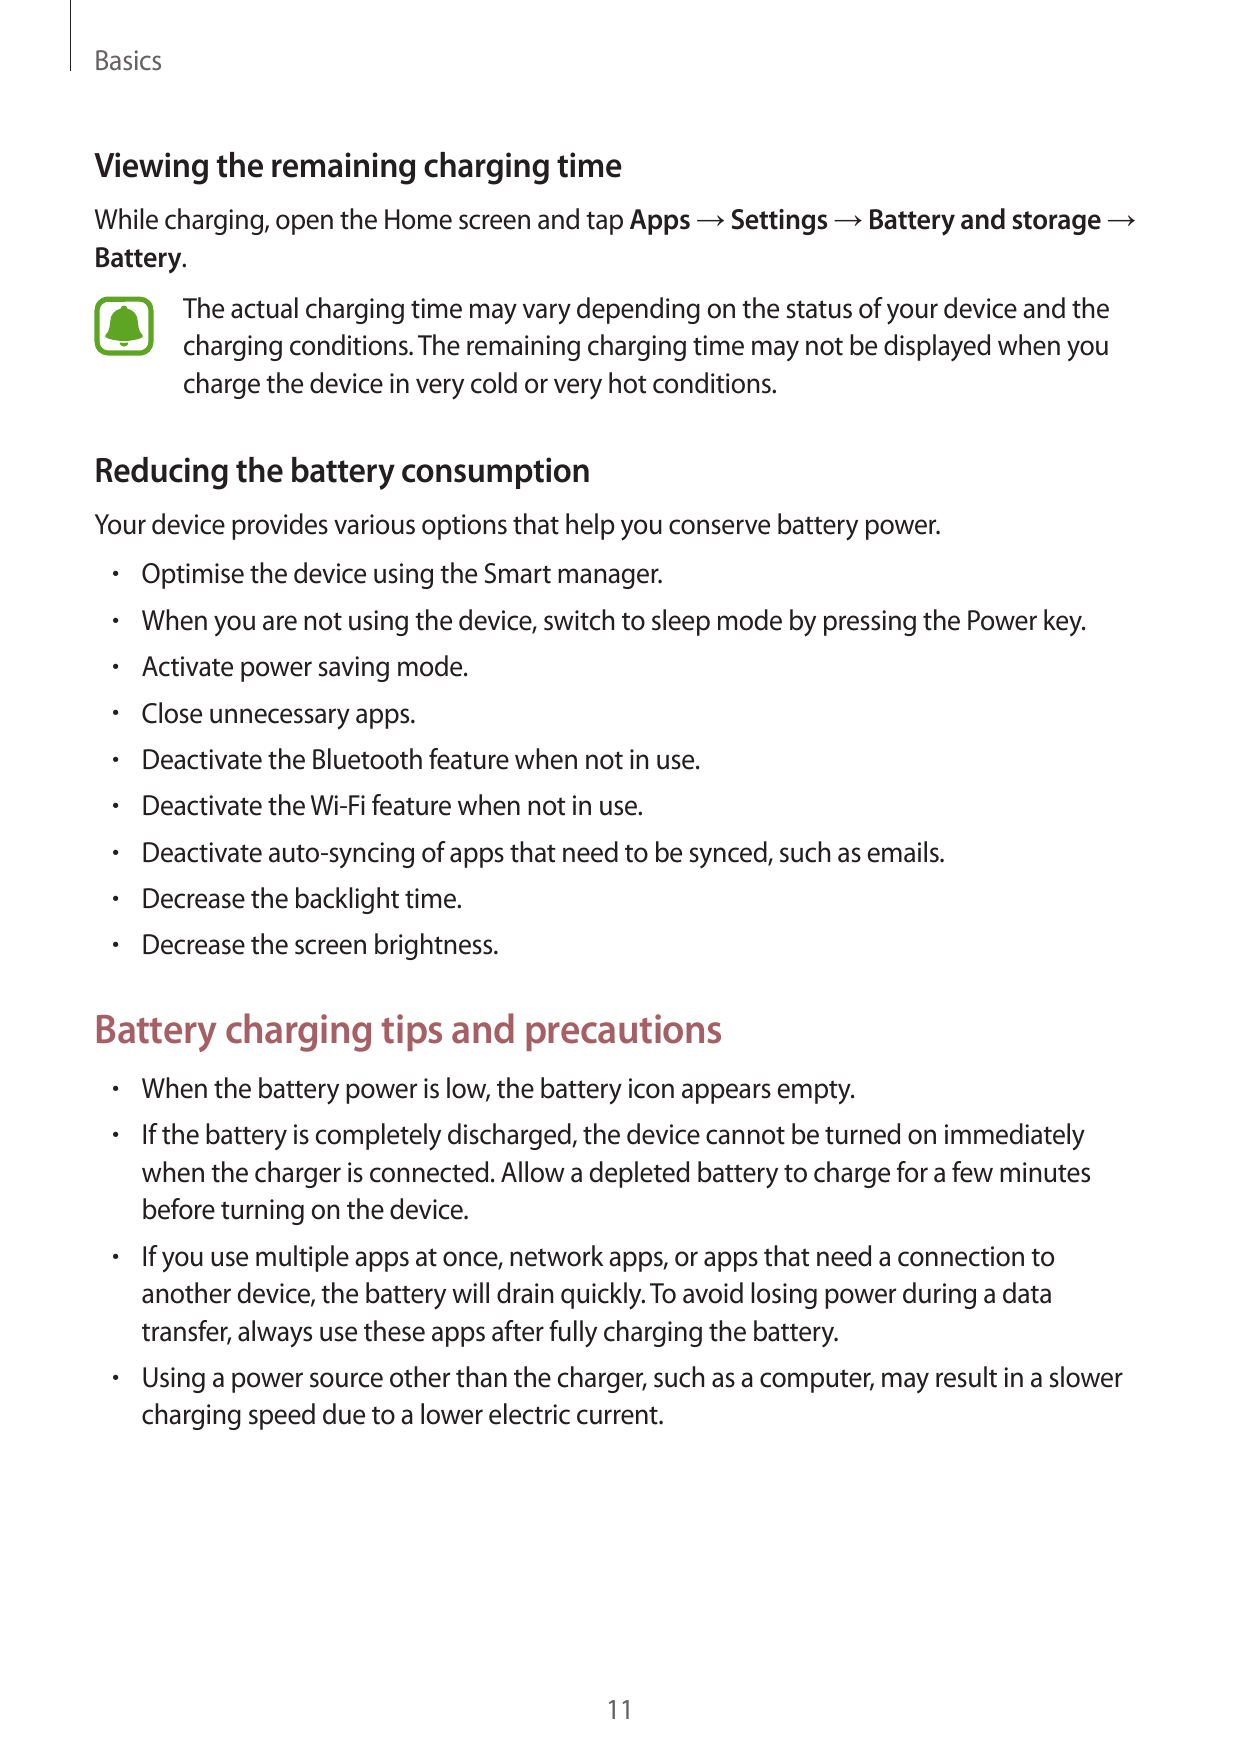 BasicsViewing the remaining charging timeWhile charging, open the Home screen and tap Apps → Settings → Battery and storage →Bat